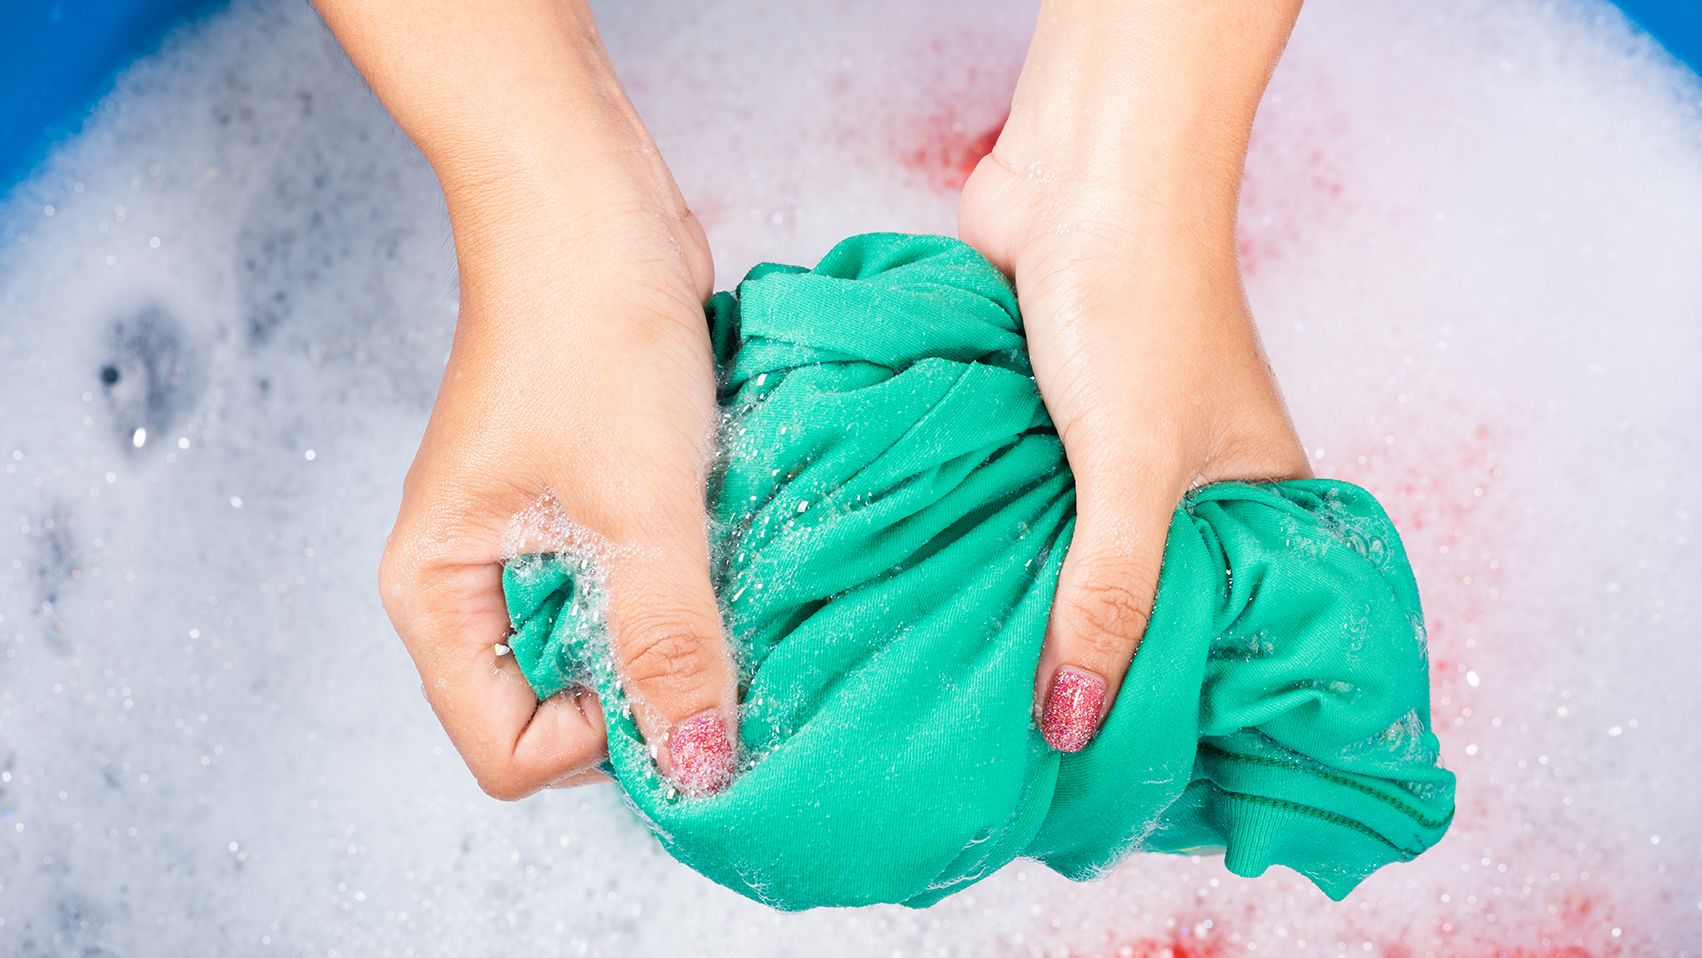 How to Hand-Wash Clothes—And When You Actually Need To